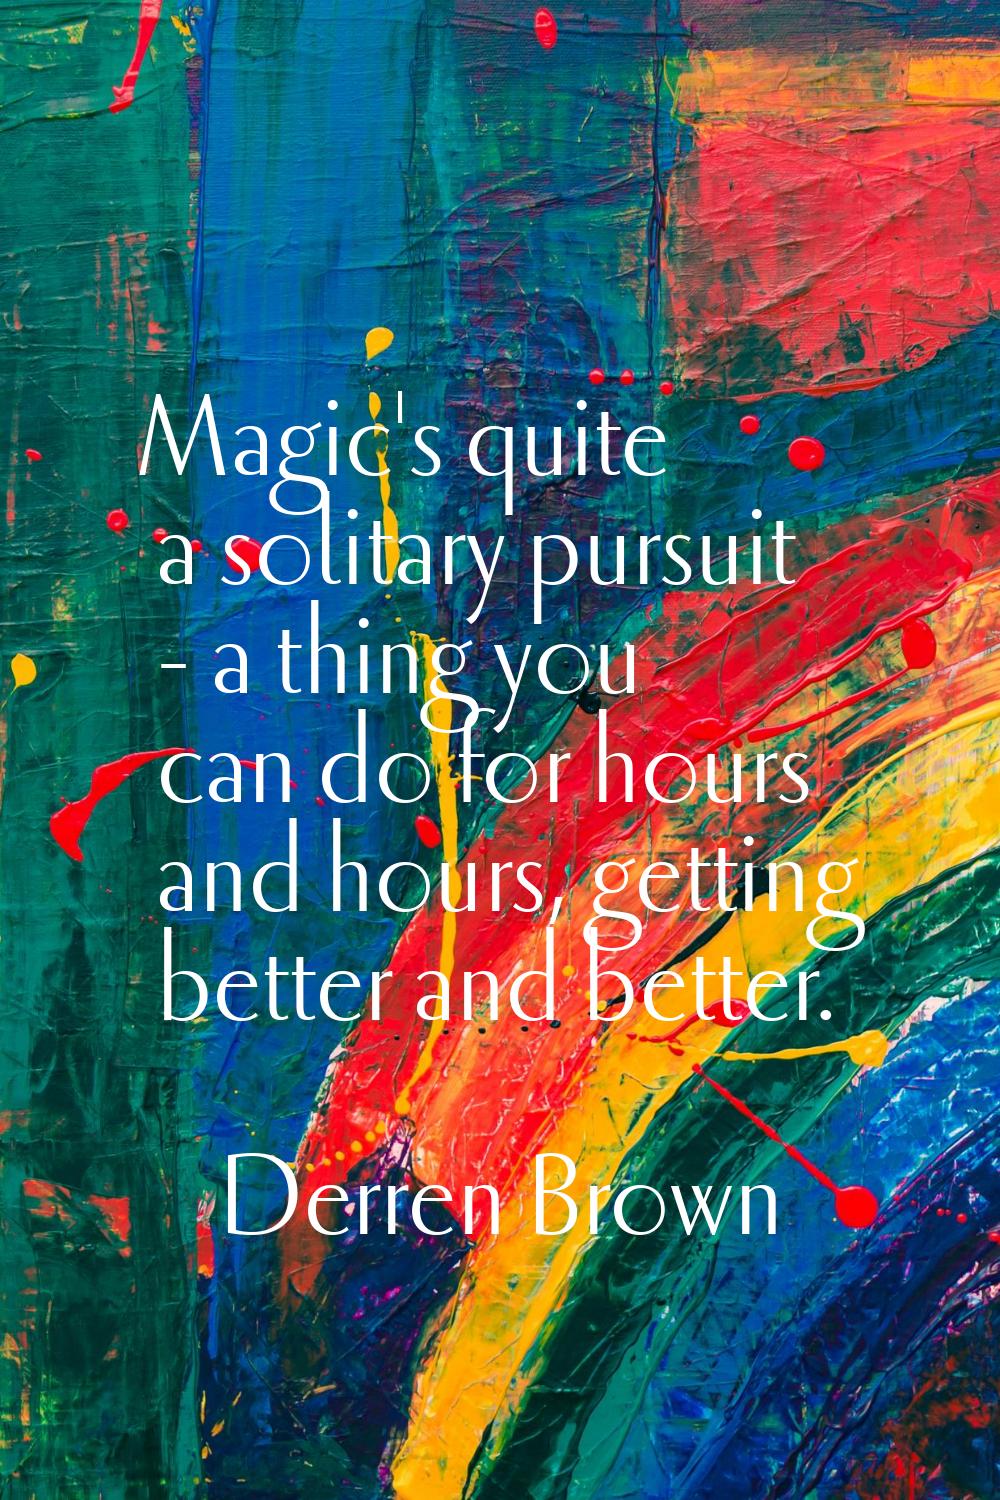 Magic's quite a solitary pursuit - a thing you can do for hours and hours, getting better and bette